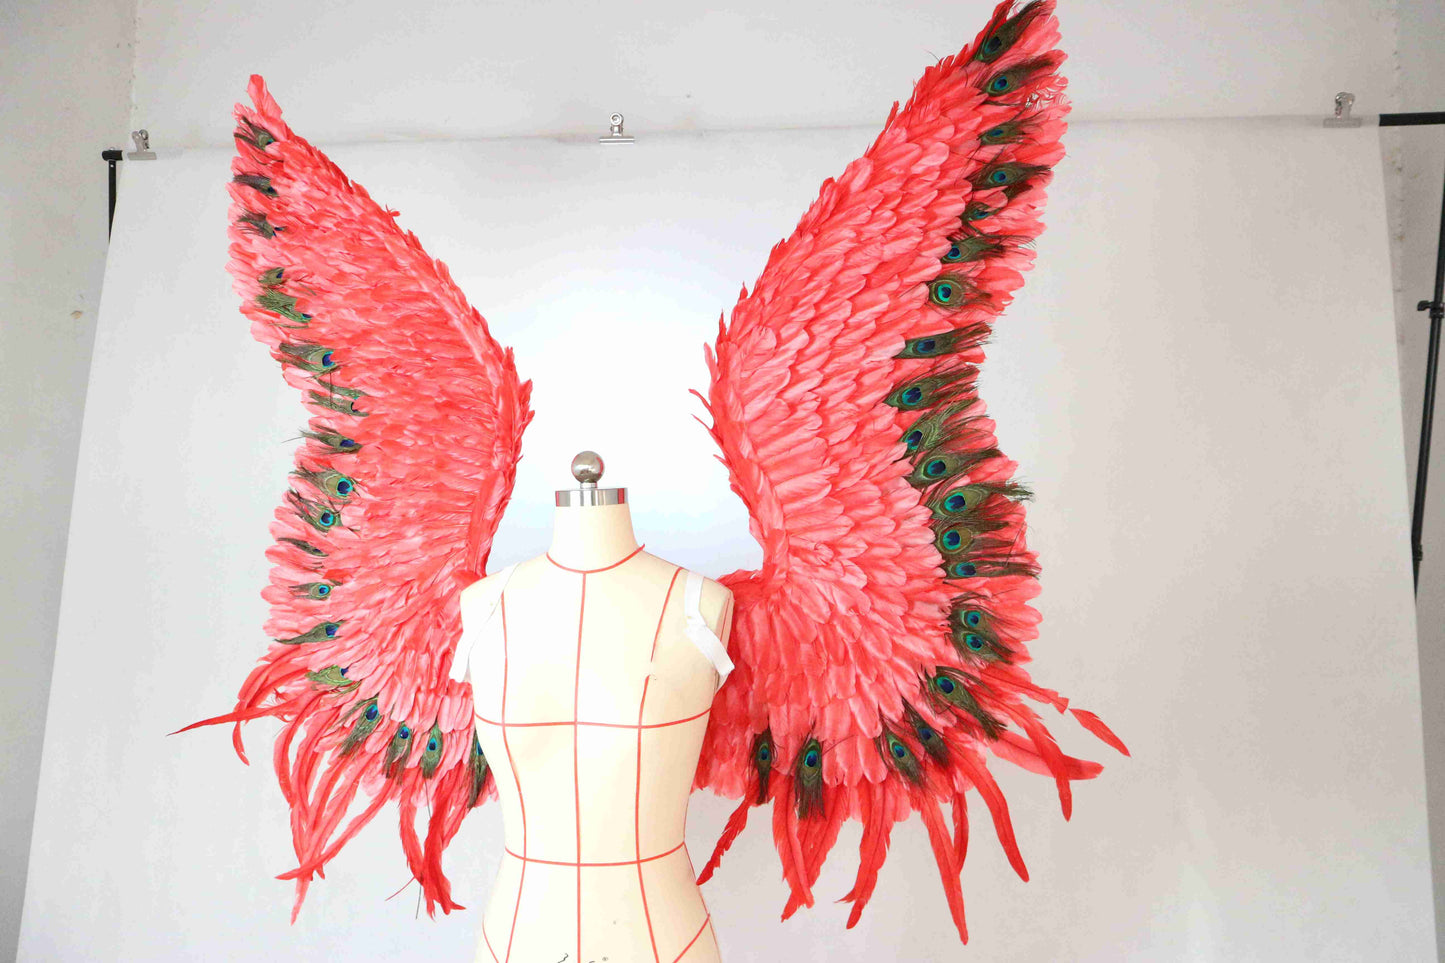 Our red peacock angel wings from the left side. Made from goose feathers and peacock feathers. Wings for angel wings costume. Suitable for photoshoots.